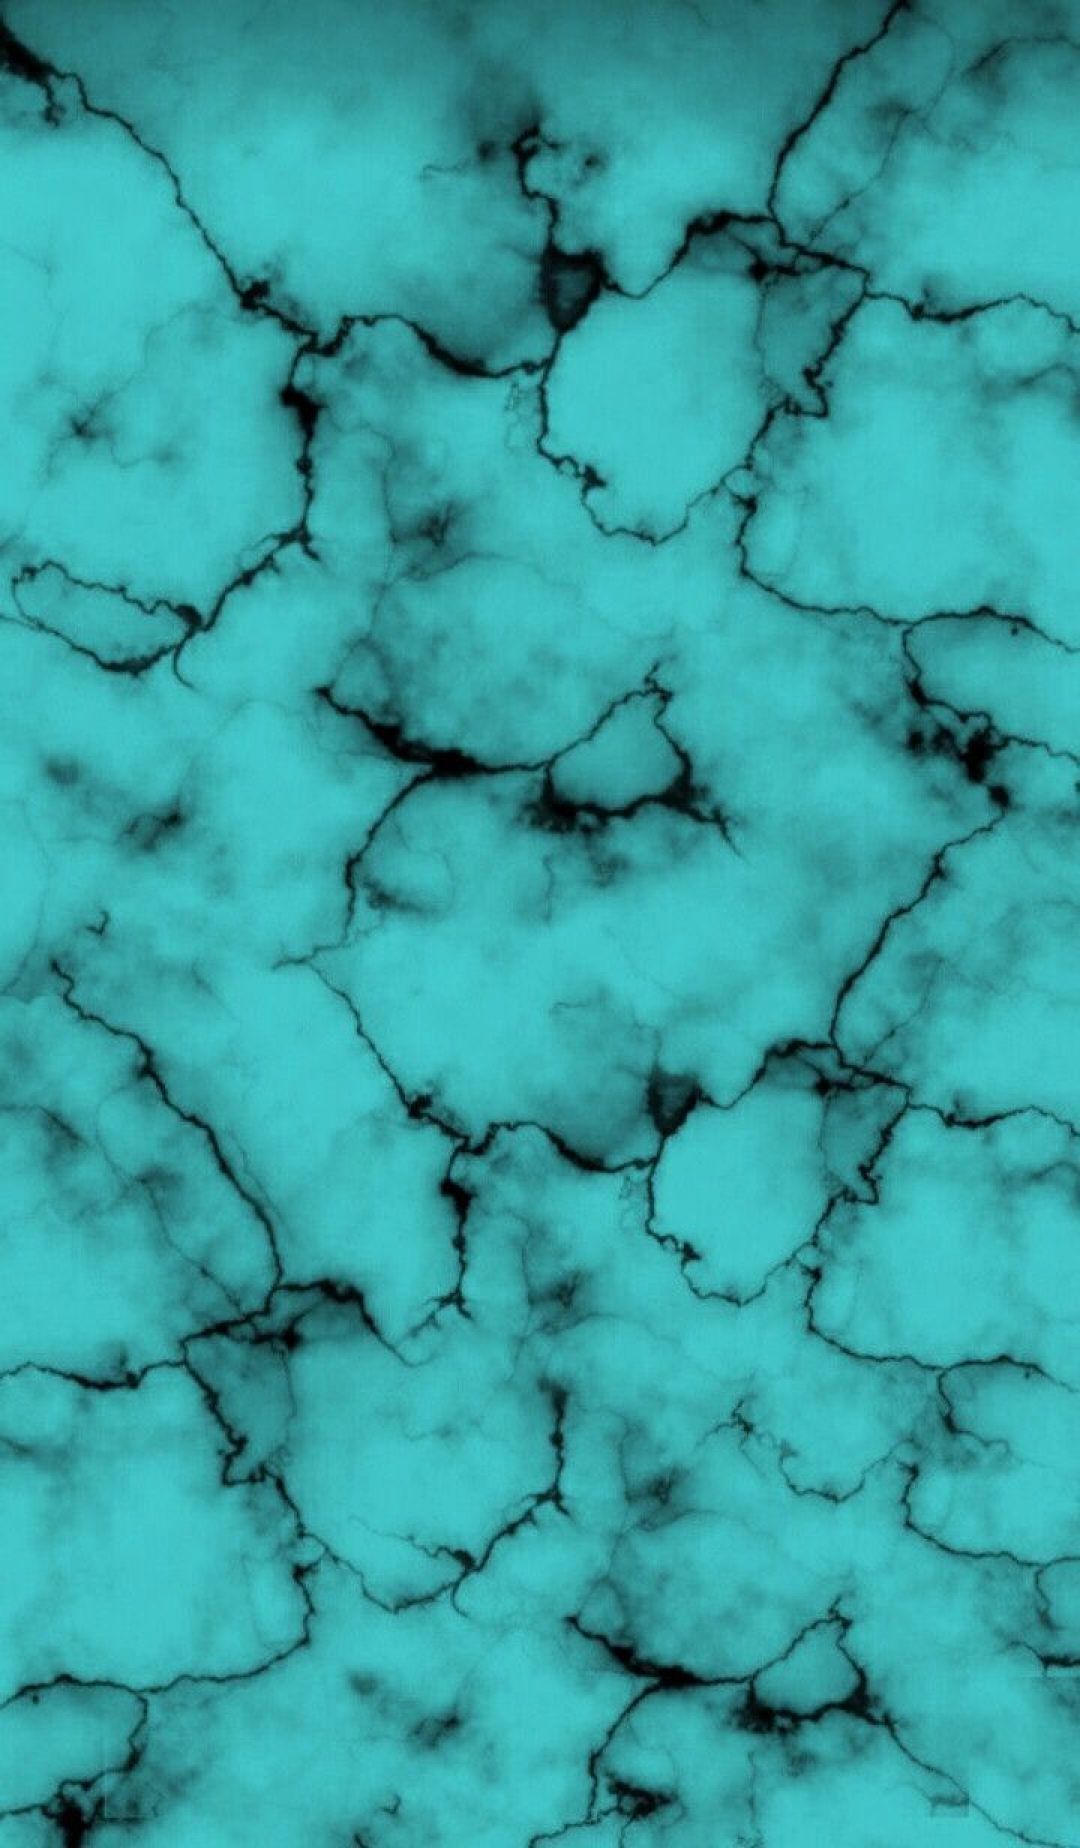 A blue marble texture with black spots - Teal, cyan, turquoise